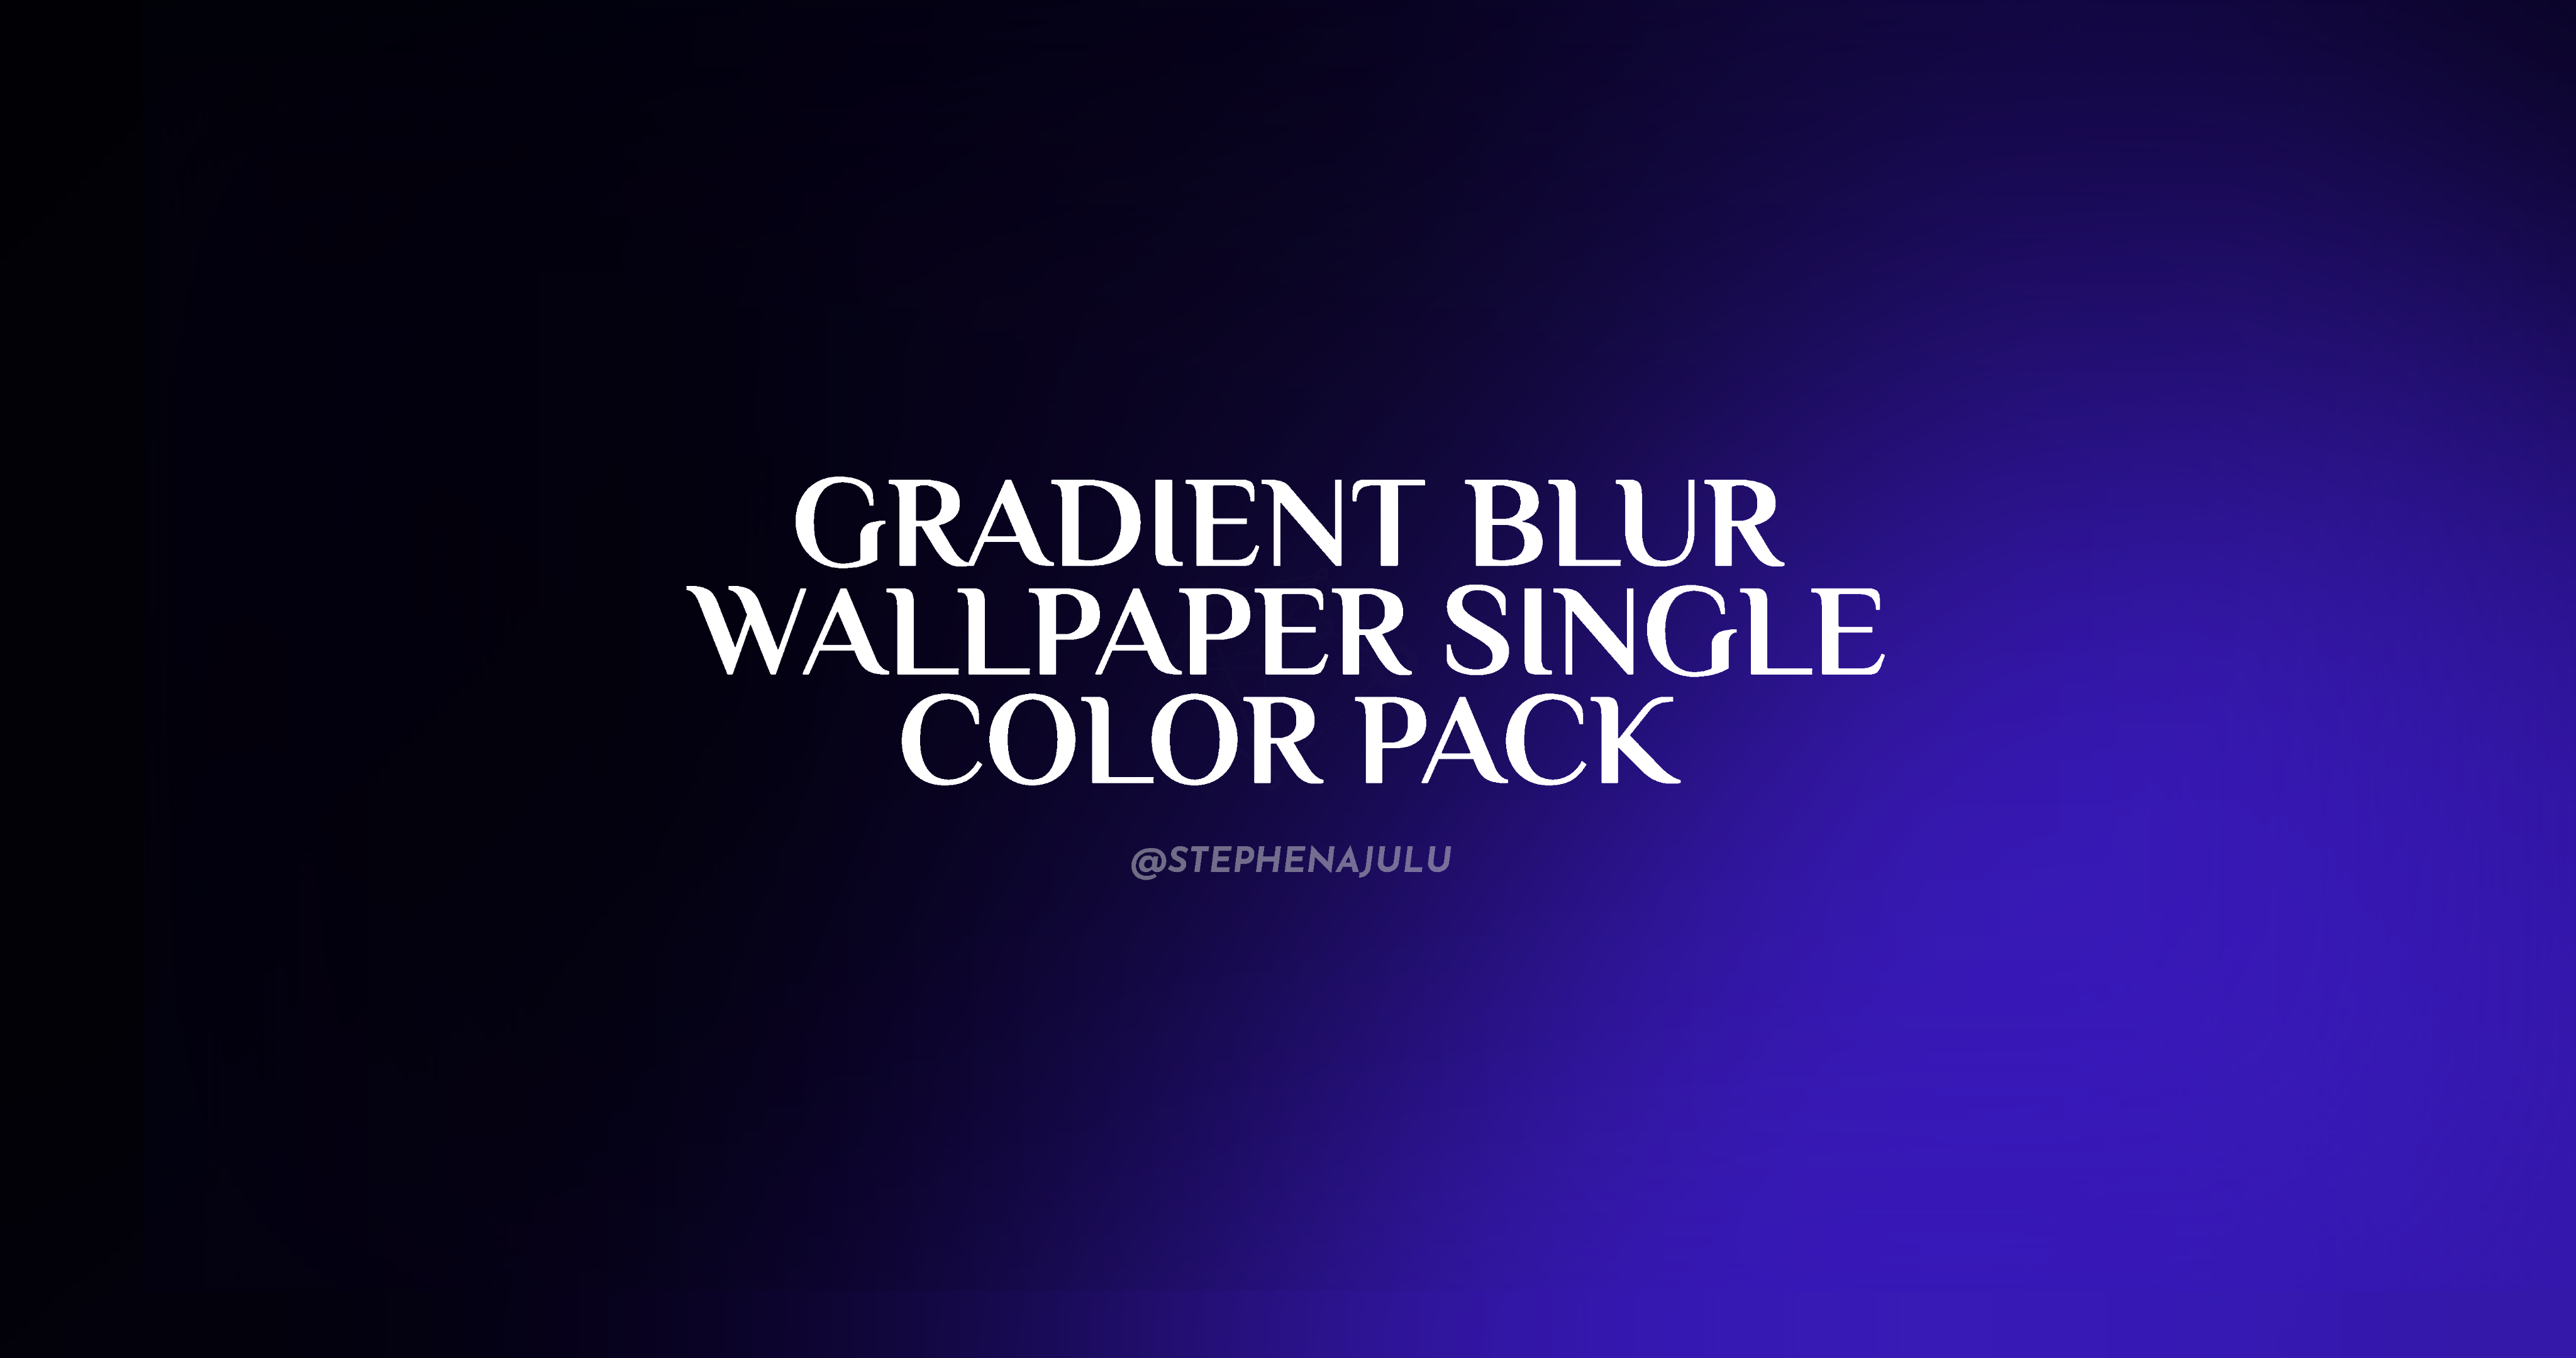 Gradient Blur Wallpaper Pack 1(Black and Single Color) feature-image